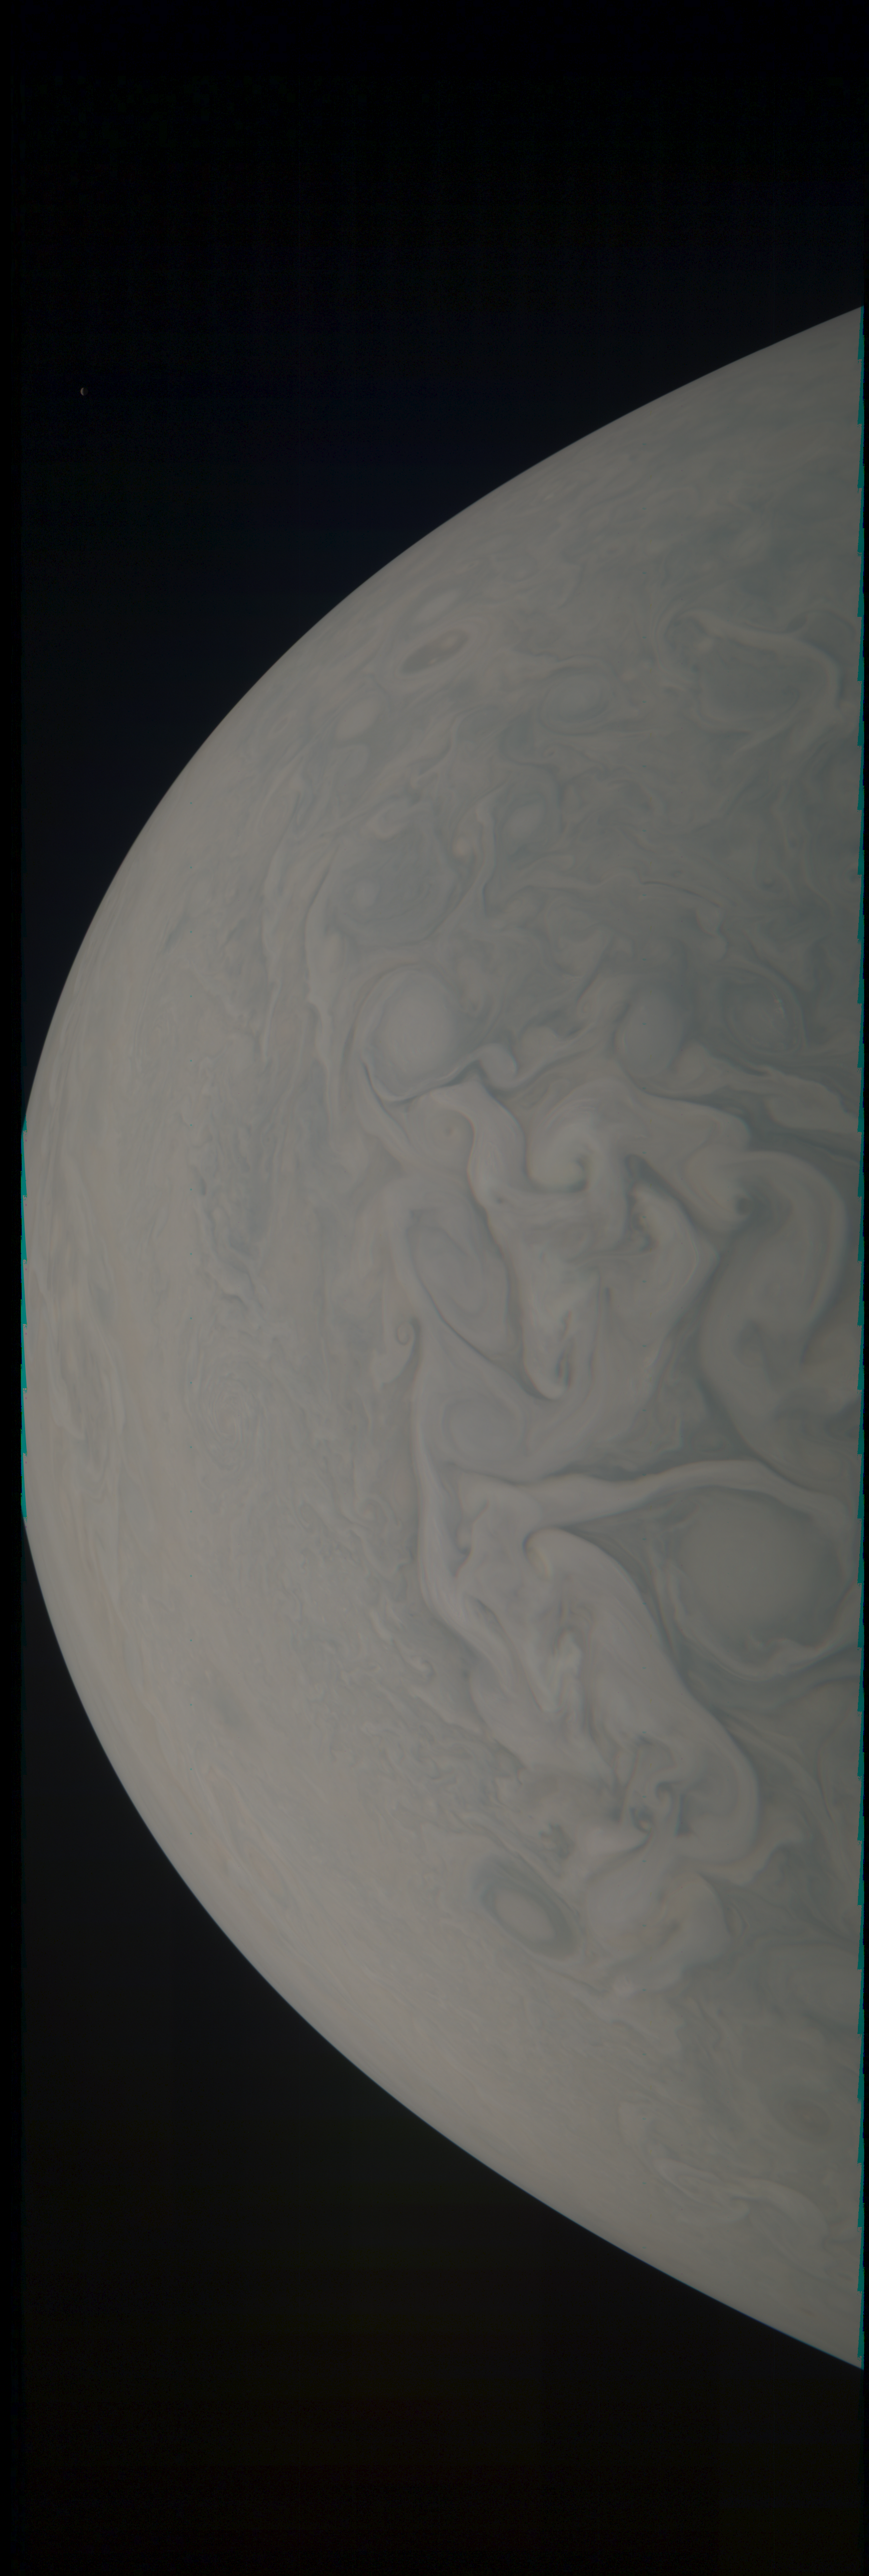 JNCE_2019307_23C00020_V01-raw_proc_hollow_sphere_c_pj_out.BMP_thumbnail_.png